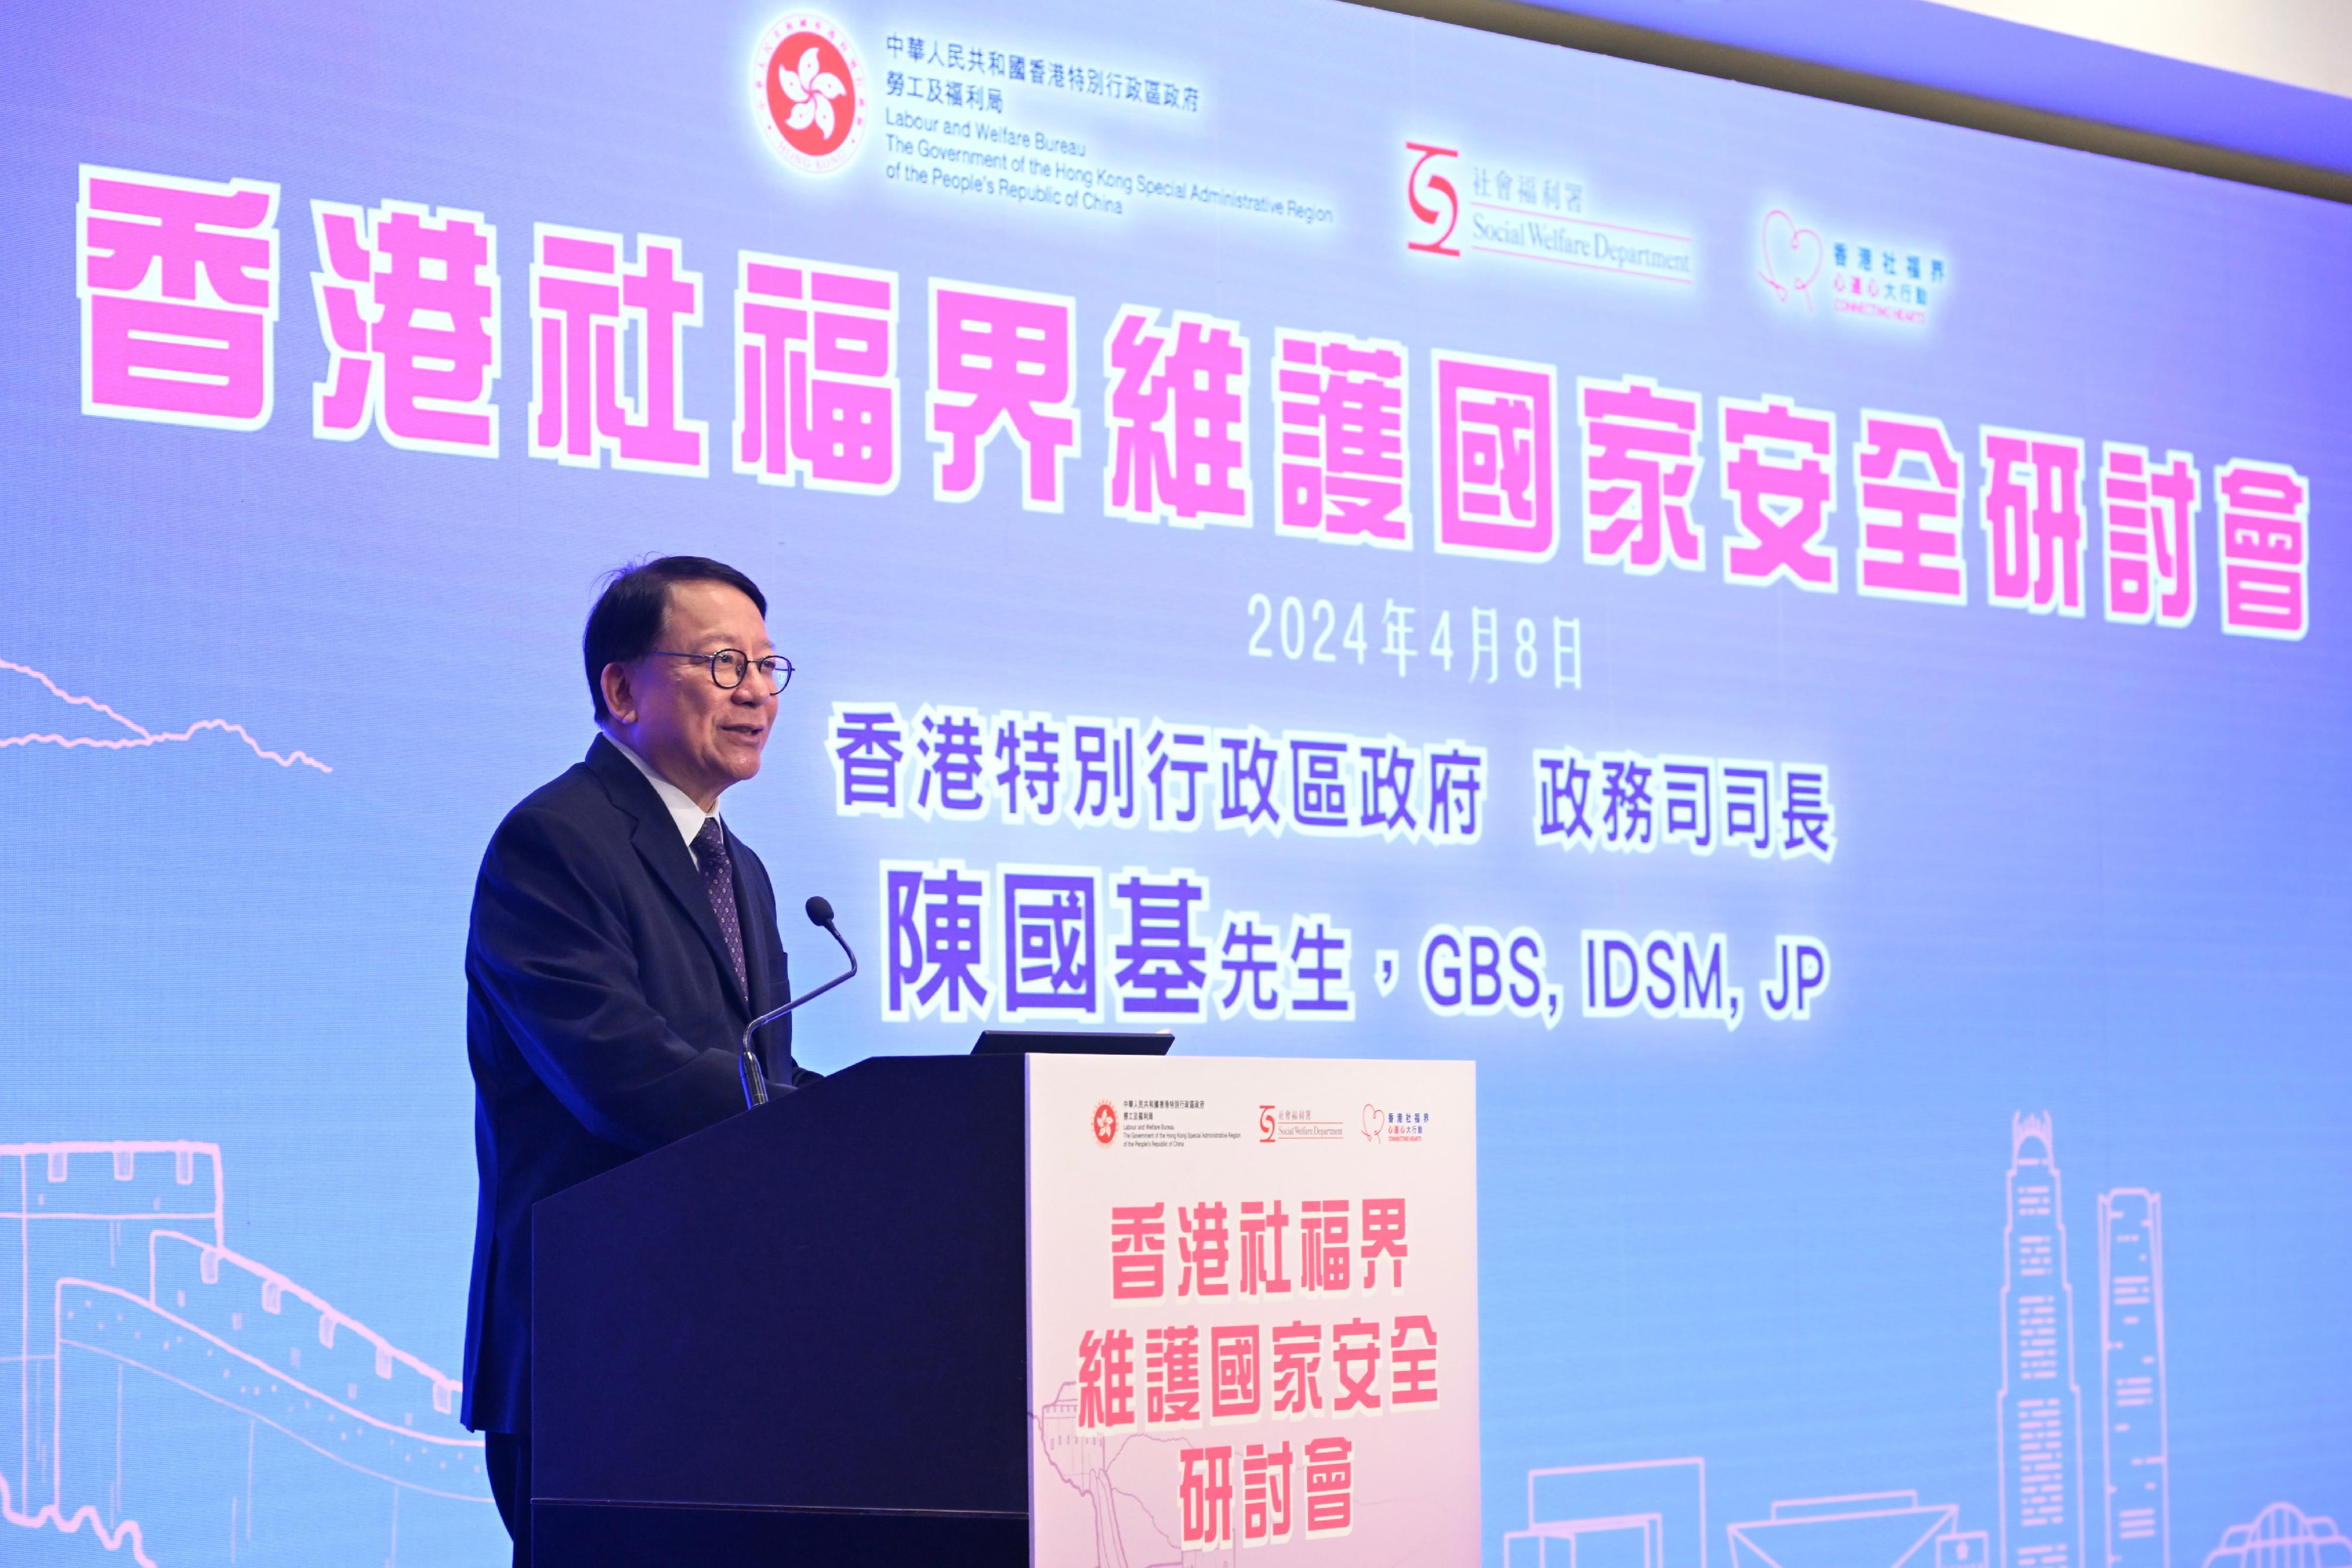 The Chief Secretary for Administration, Mr Chan Kwok-ki, speaks at the symposium on safeguarding national security for the social welfare sector of Hong Kong today (April 8).